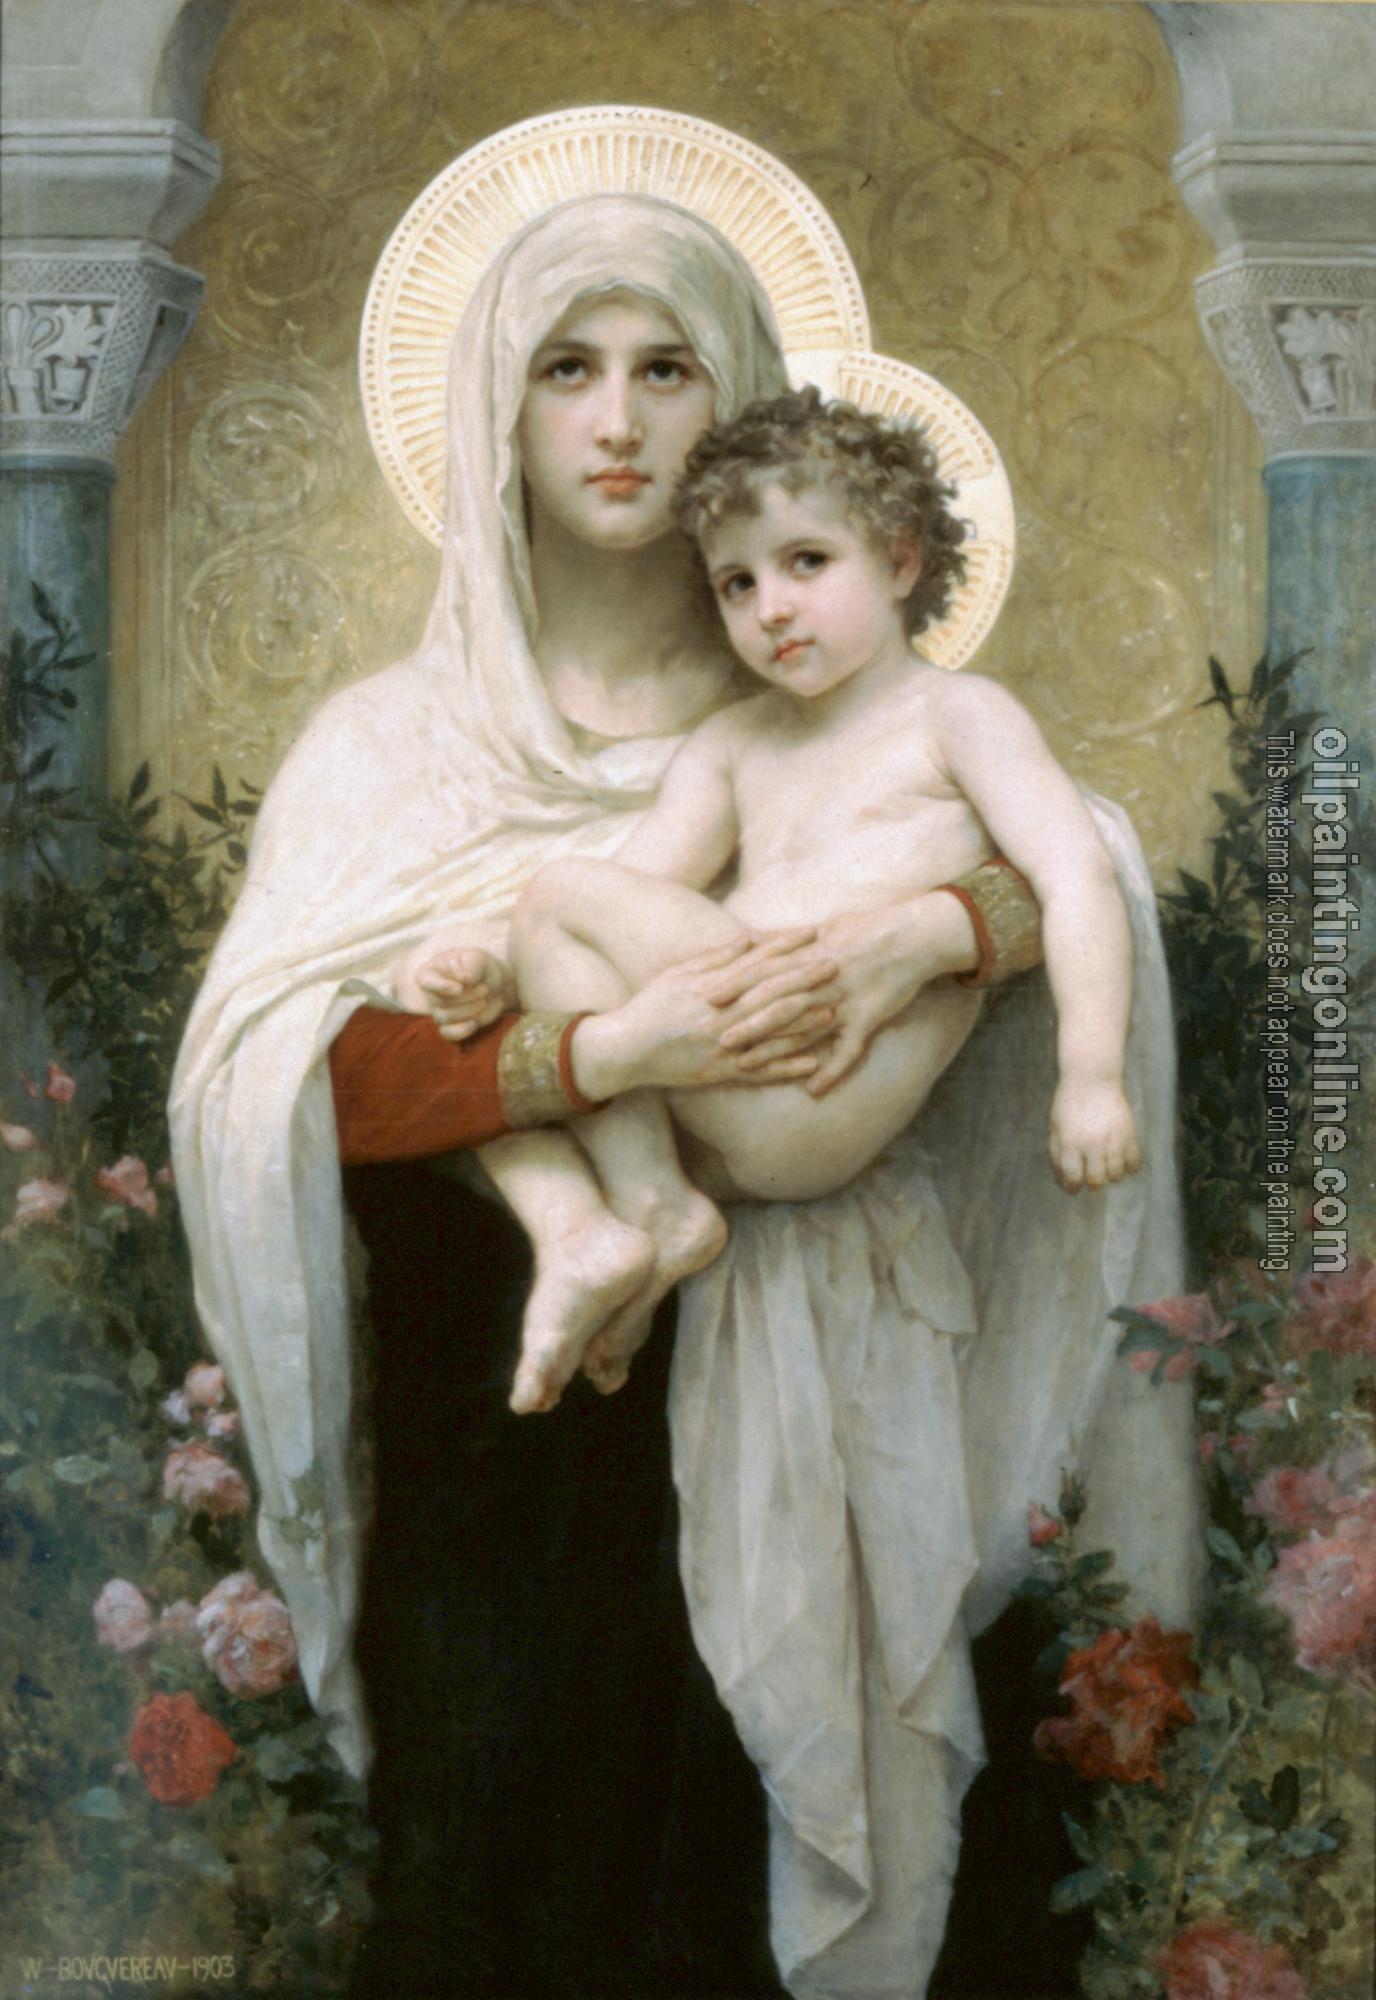 Bouguereau, William-Adolphe - The Madonna of the Roses